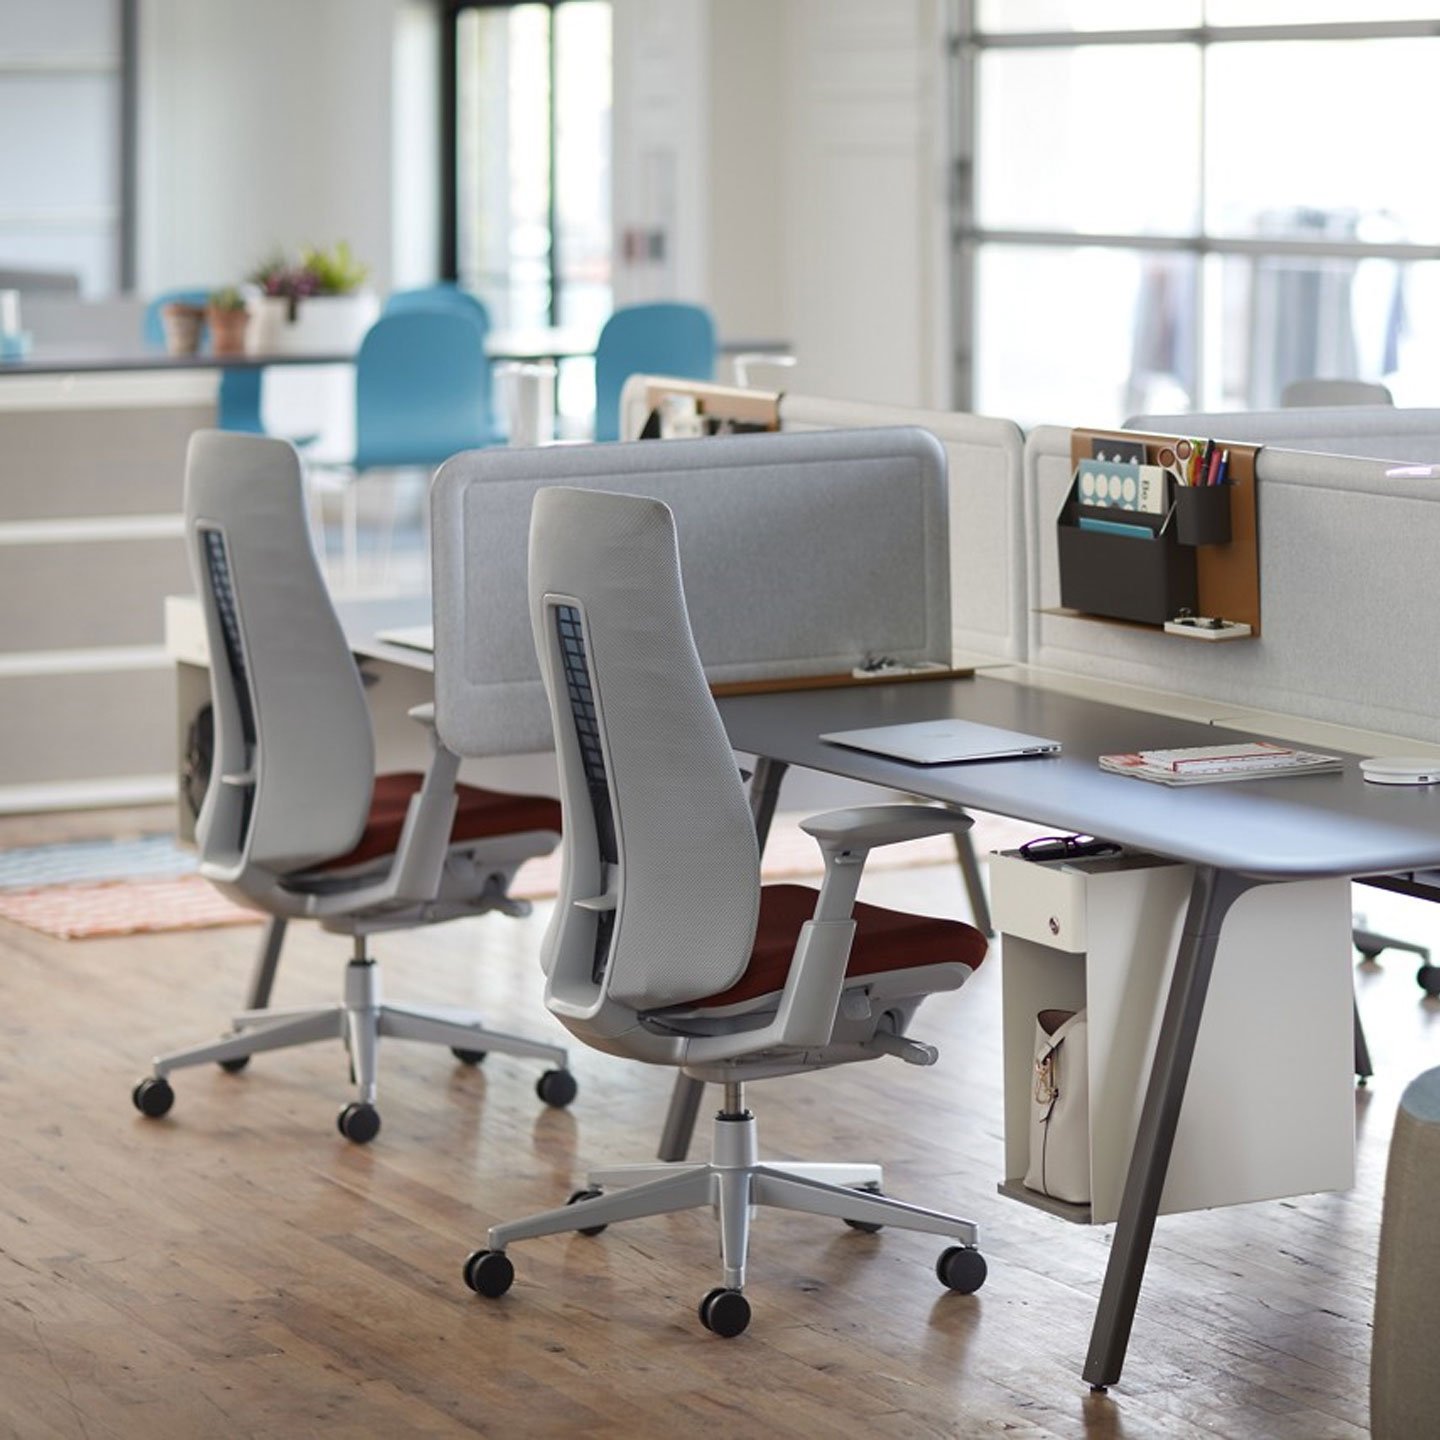 Haworth Intuity Workspace divider in open office space with desks with storage compartments and fern chairs